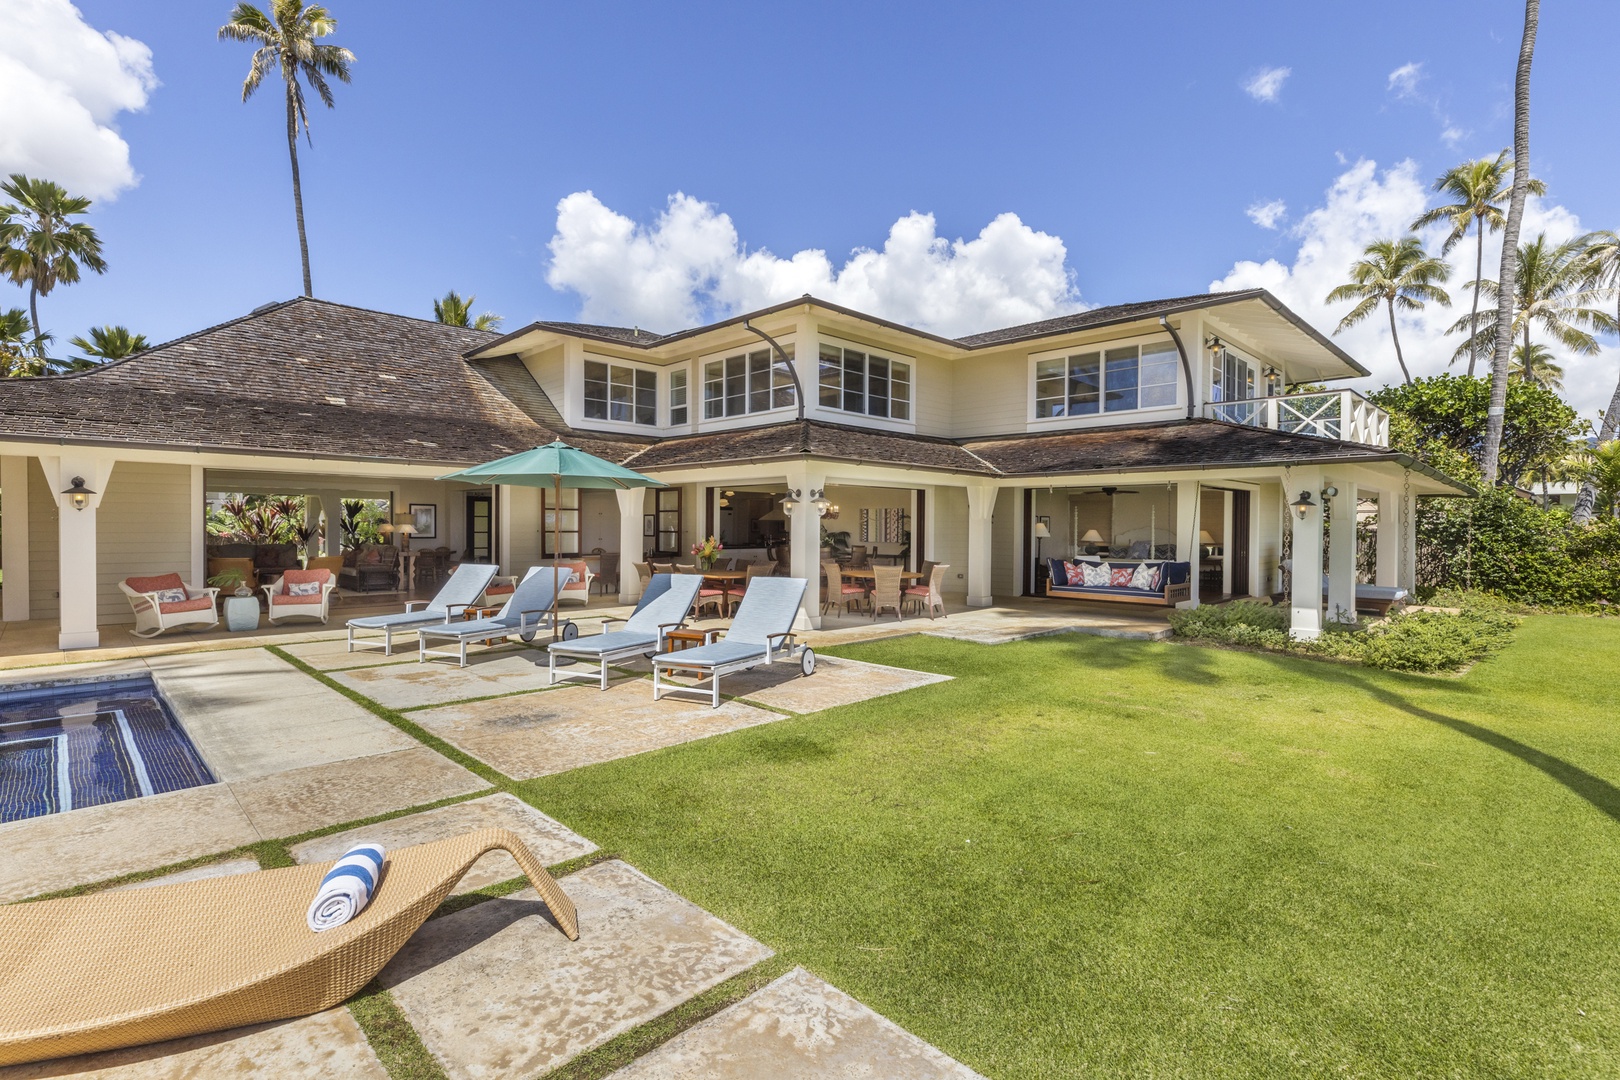 Honolulu Vacation Rentals, Kahala Beachside Estate - Enjoy complete privacy in a fully gated property